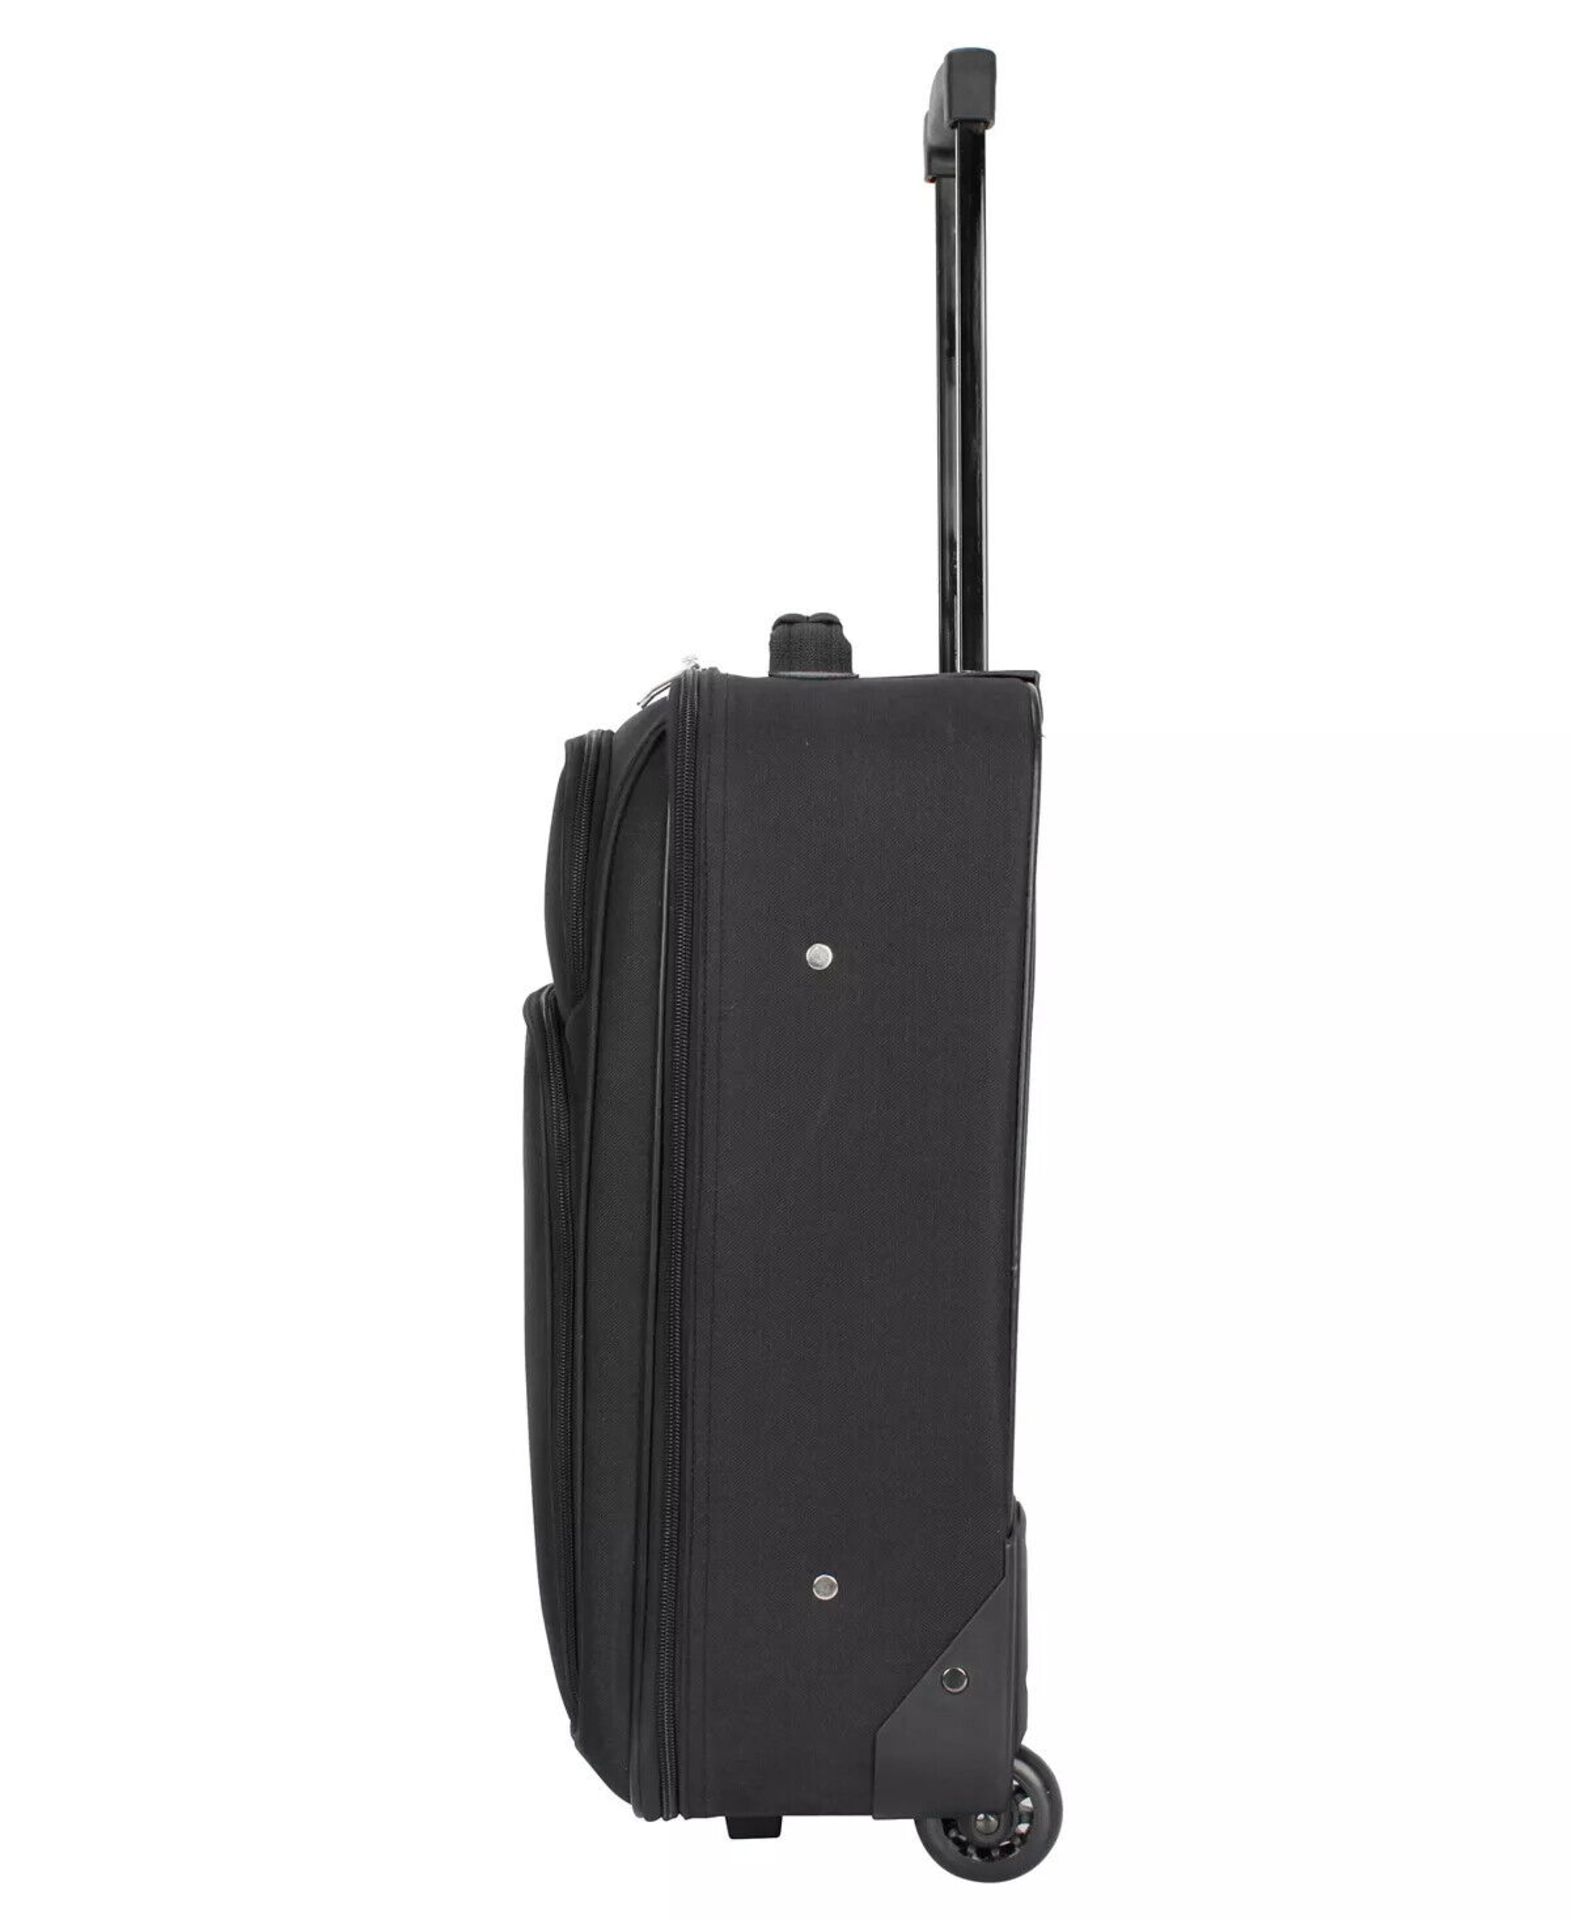 PALLET CONTANING 10 SETS OF 5 PC GENUINE TAG RIDGEFIELD SOFTSIDE LIGHTWEIGHT LUGGAGE SET - Image 7 of 10